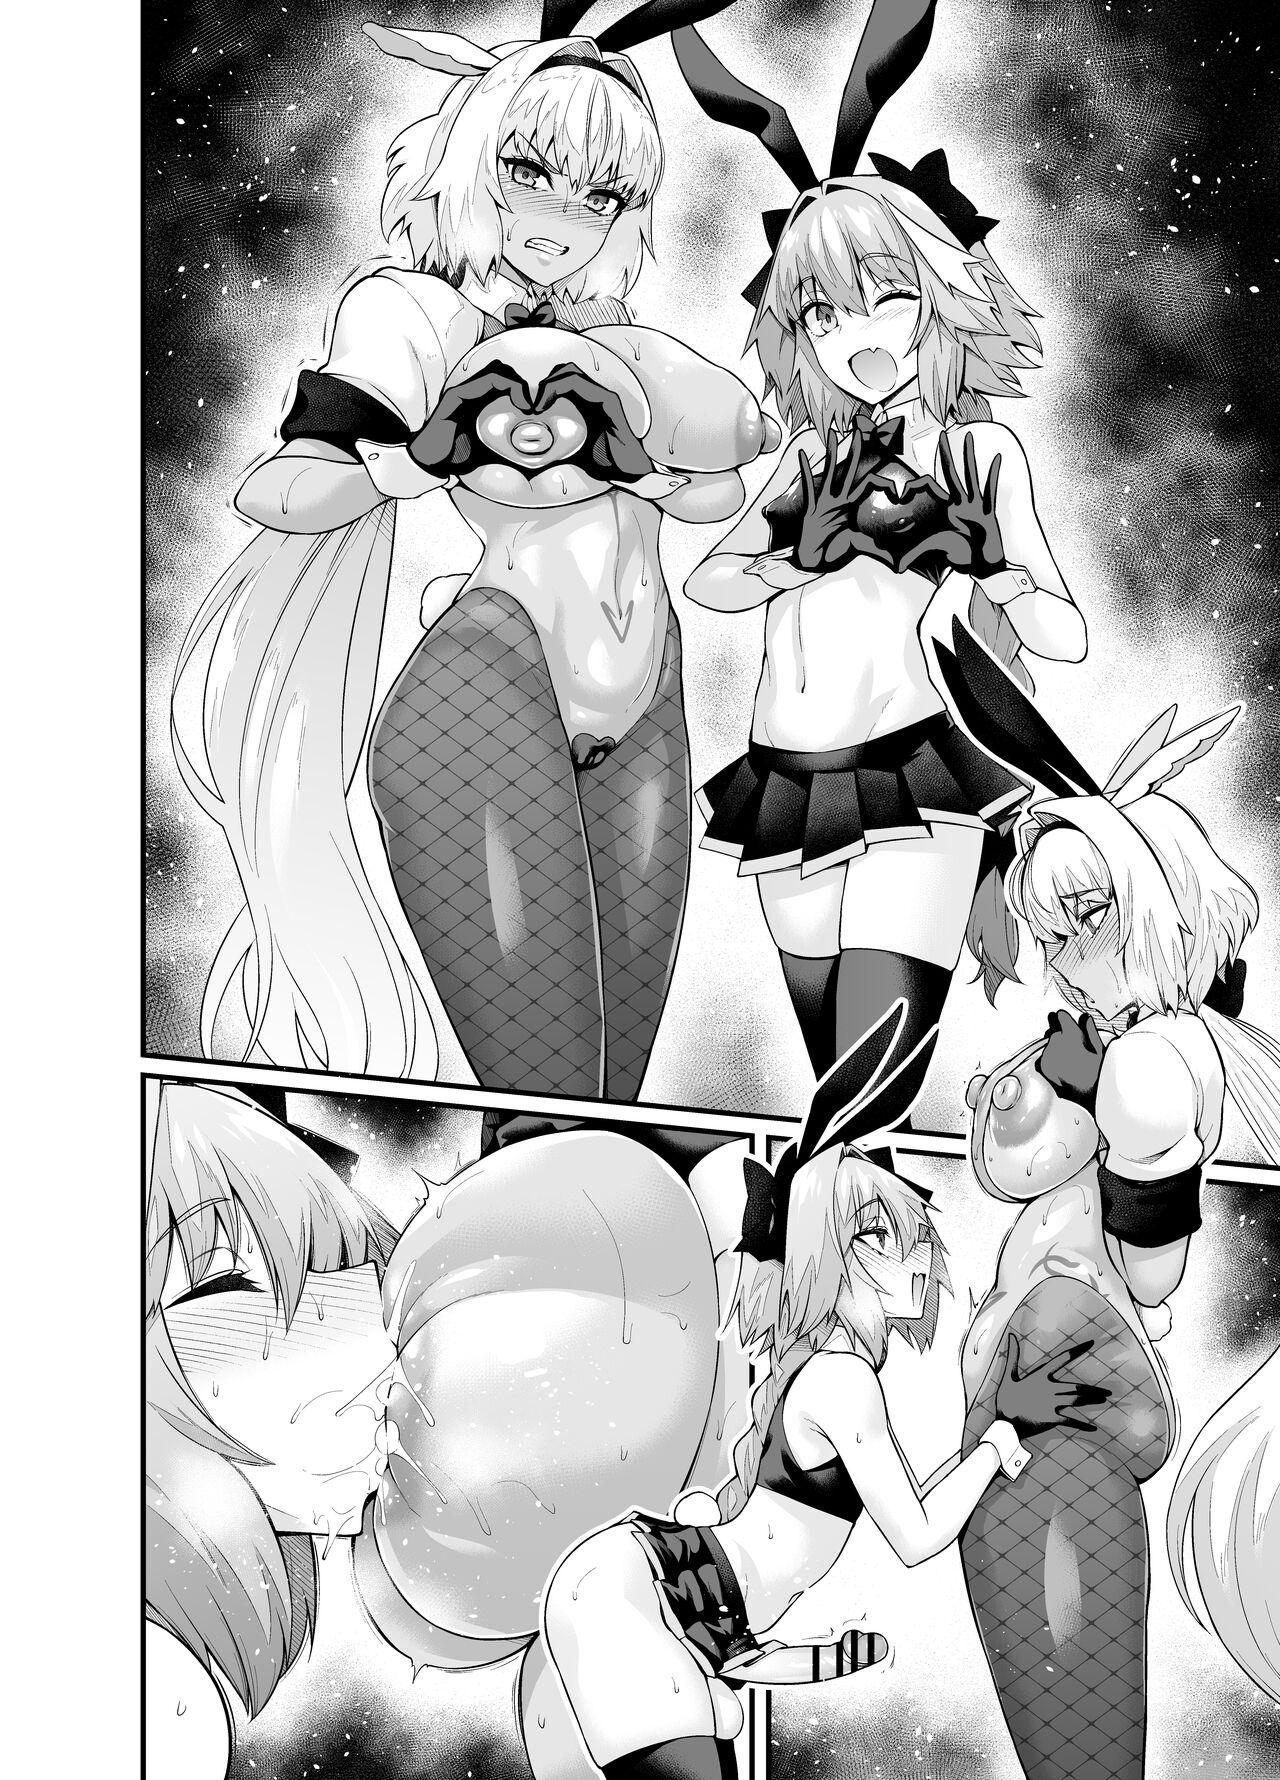 Butts Caenis, Astolfo to Pyon-Pyon Suru - Fate grand order Spread - Page 6